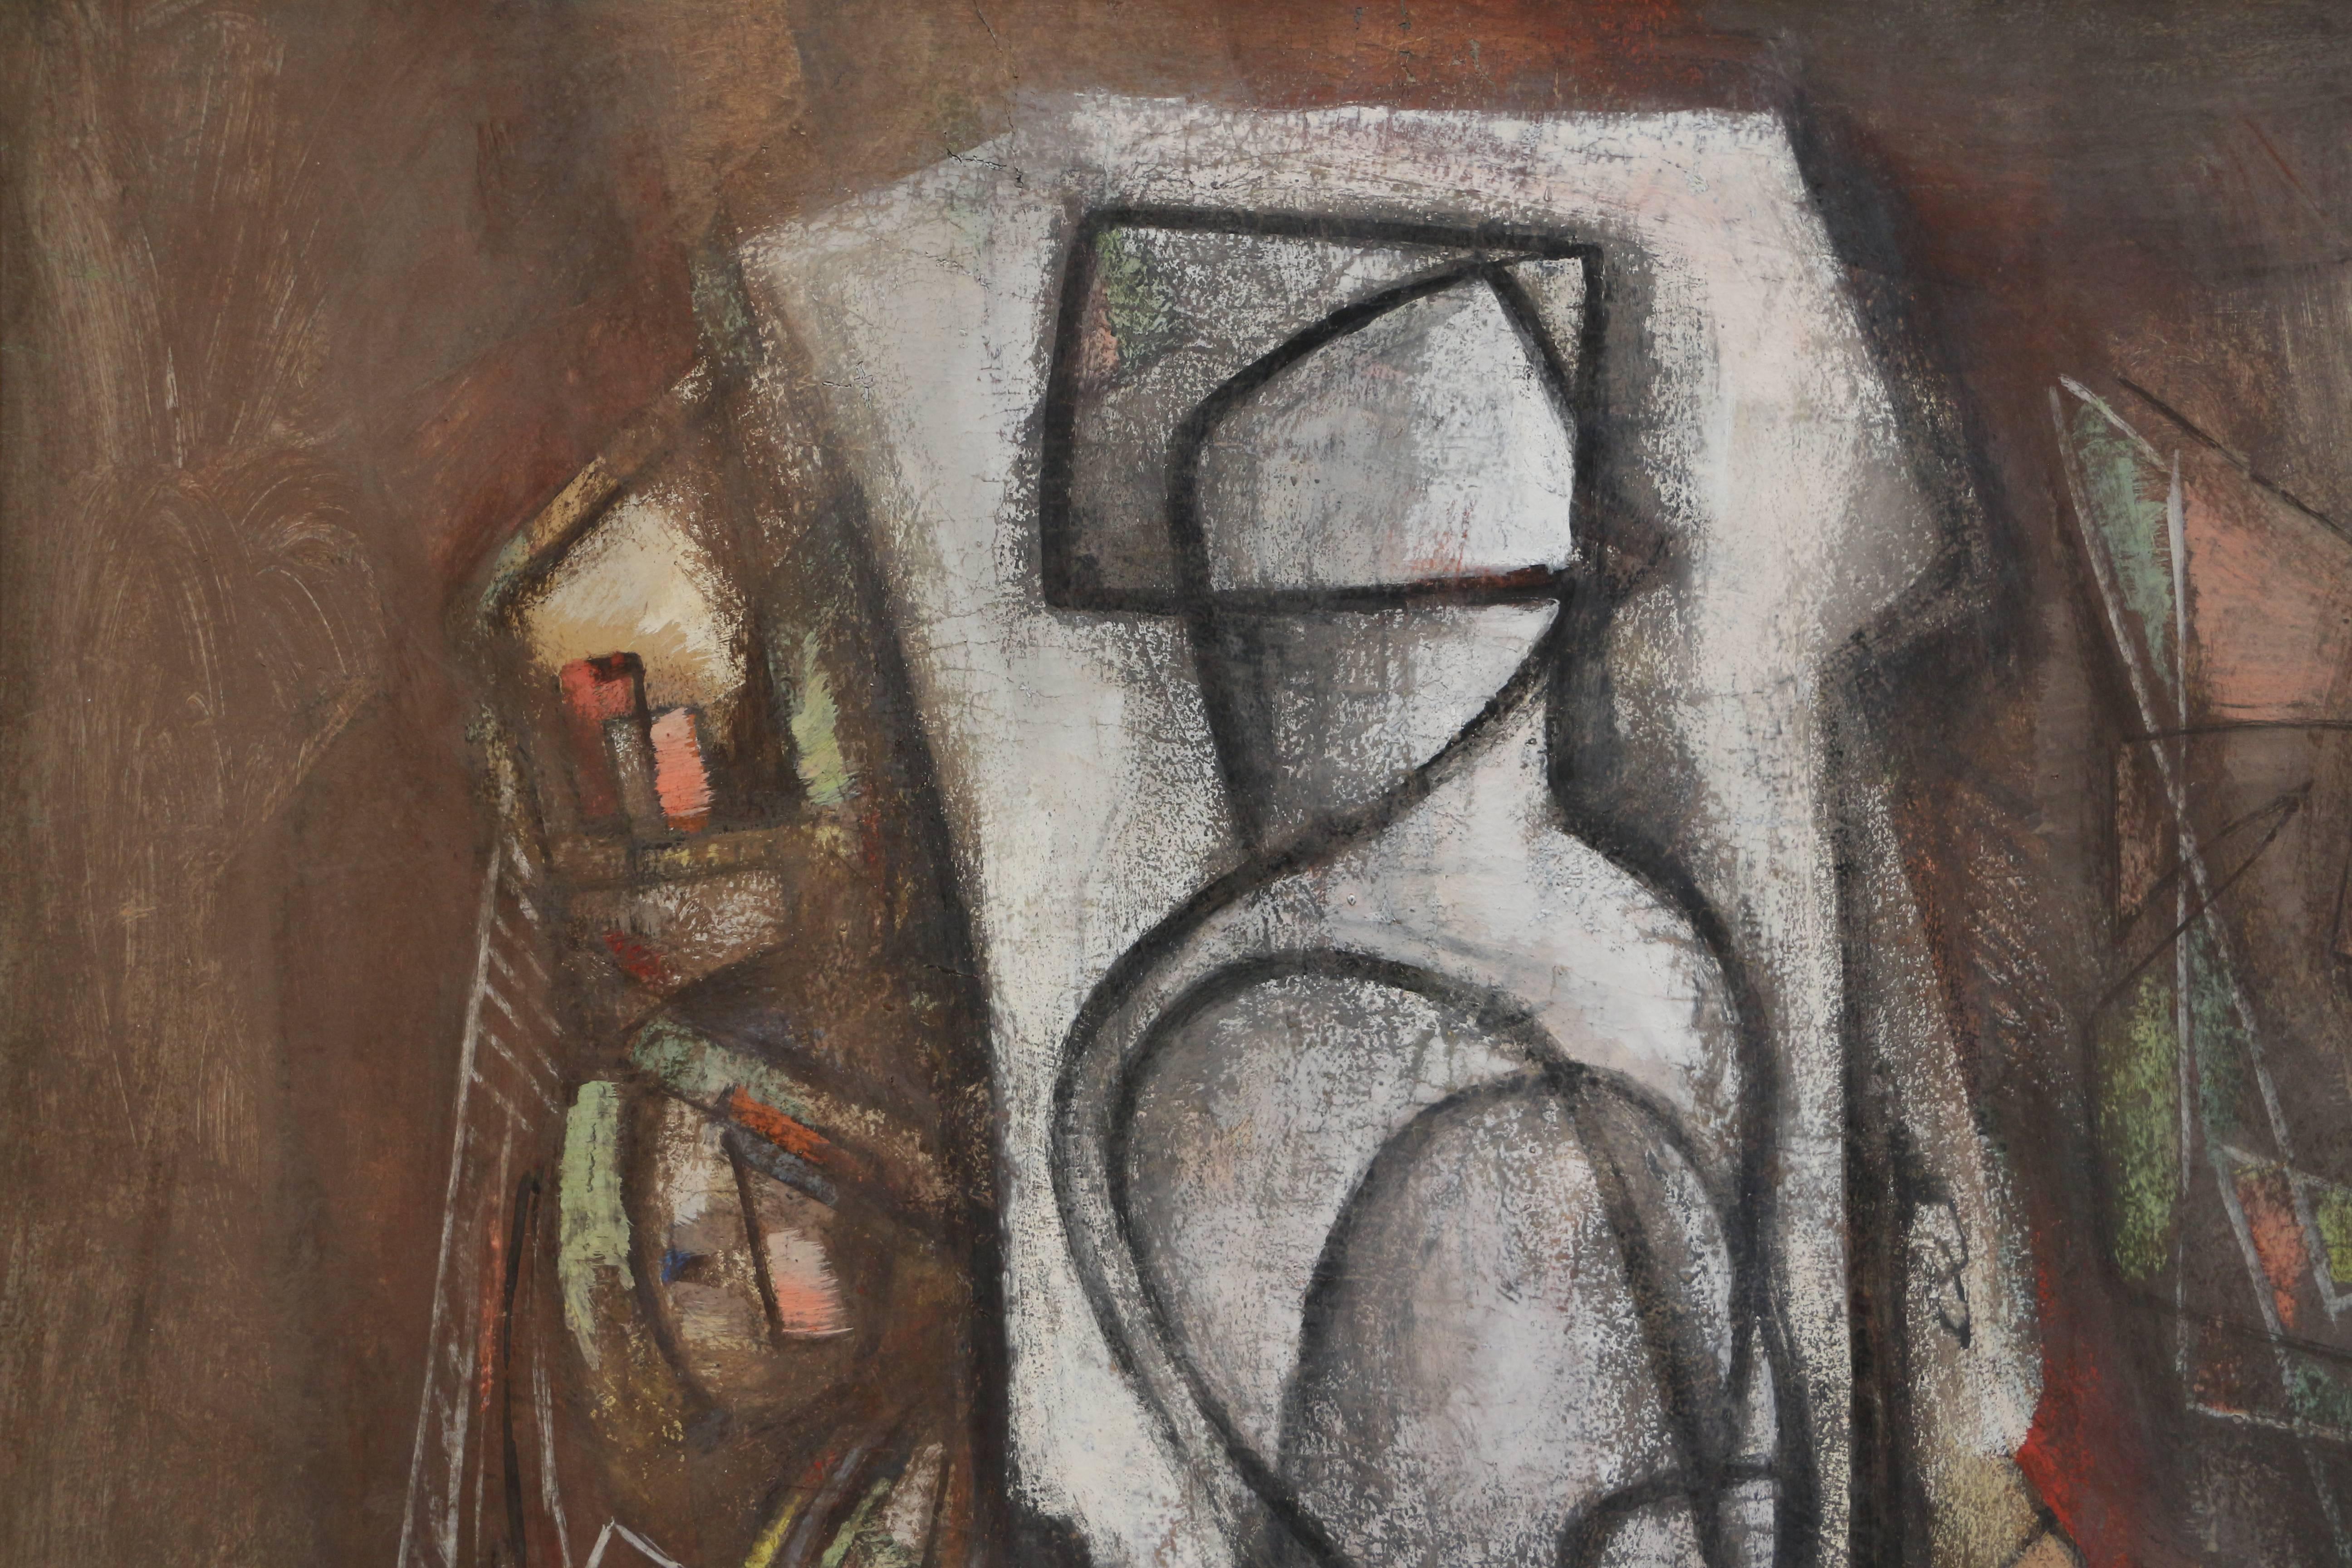 Untitled Composition with Figure, cubist work with central figure - Cubist Painting by Bela Kadar